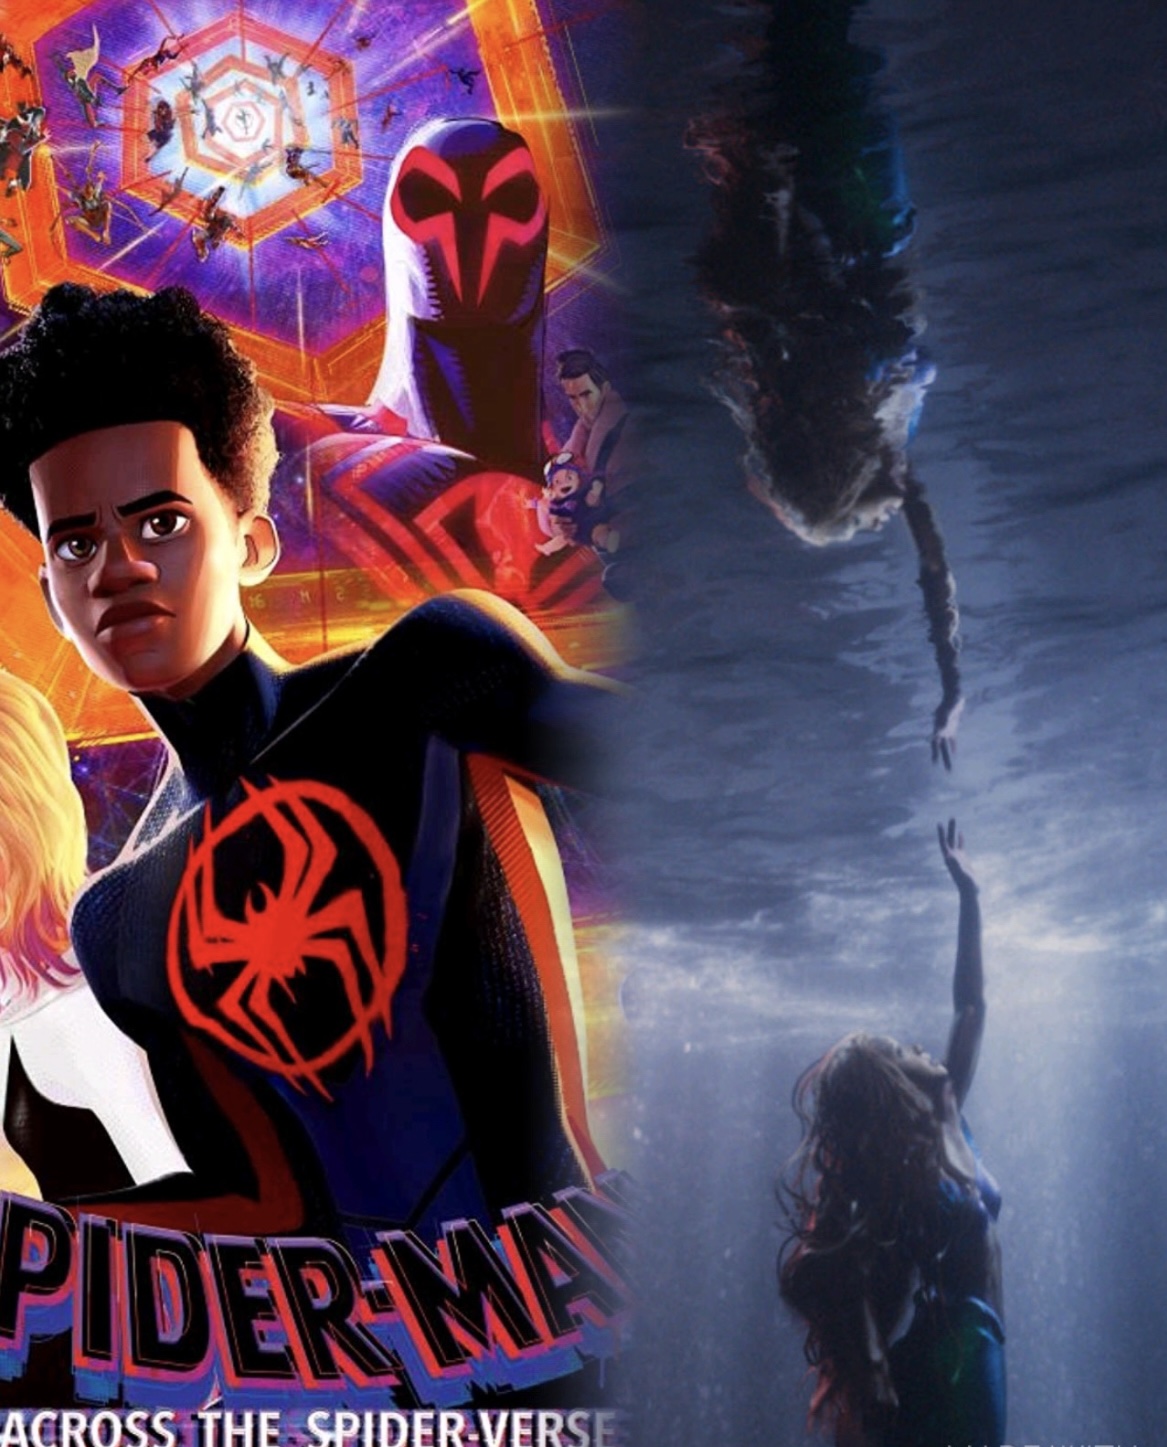 Spider-Man Across the Spider-Verse +Little Mermaid-2 Black Characters Top Box Office!